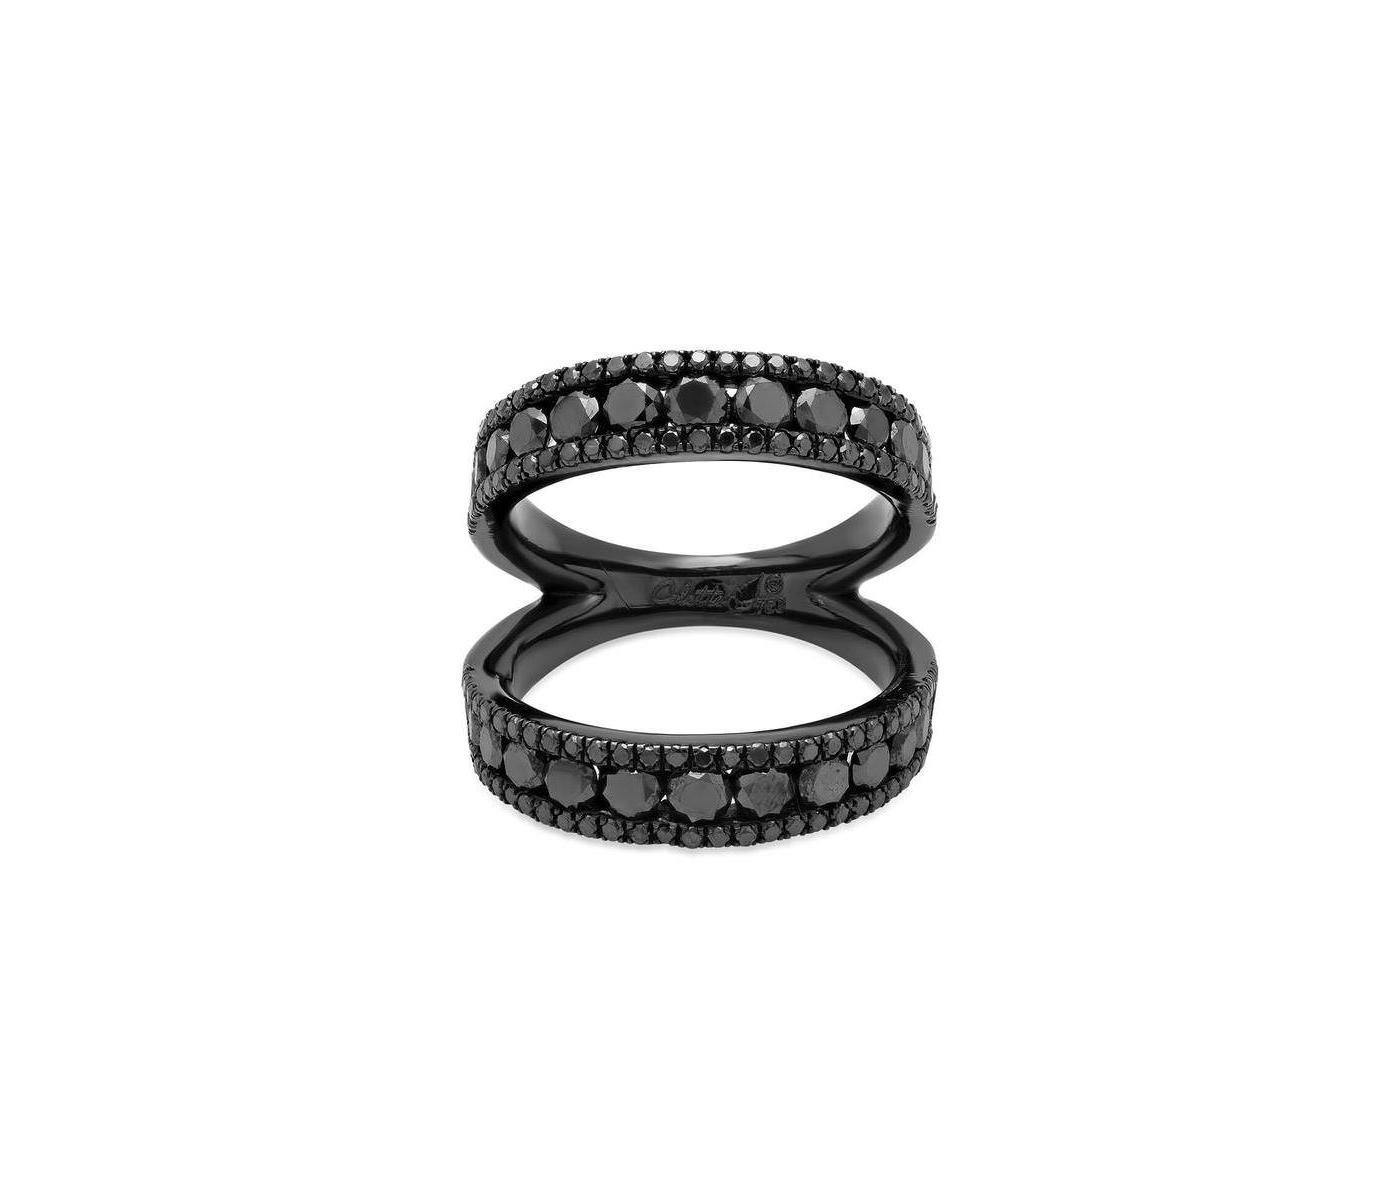 Ring by Colette